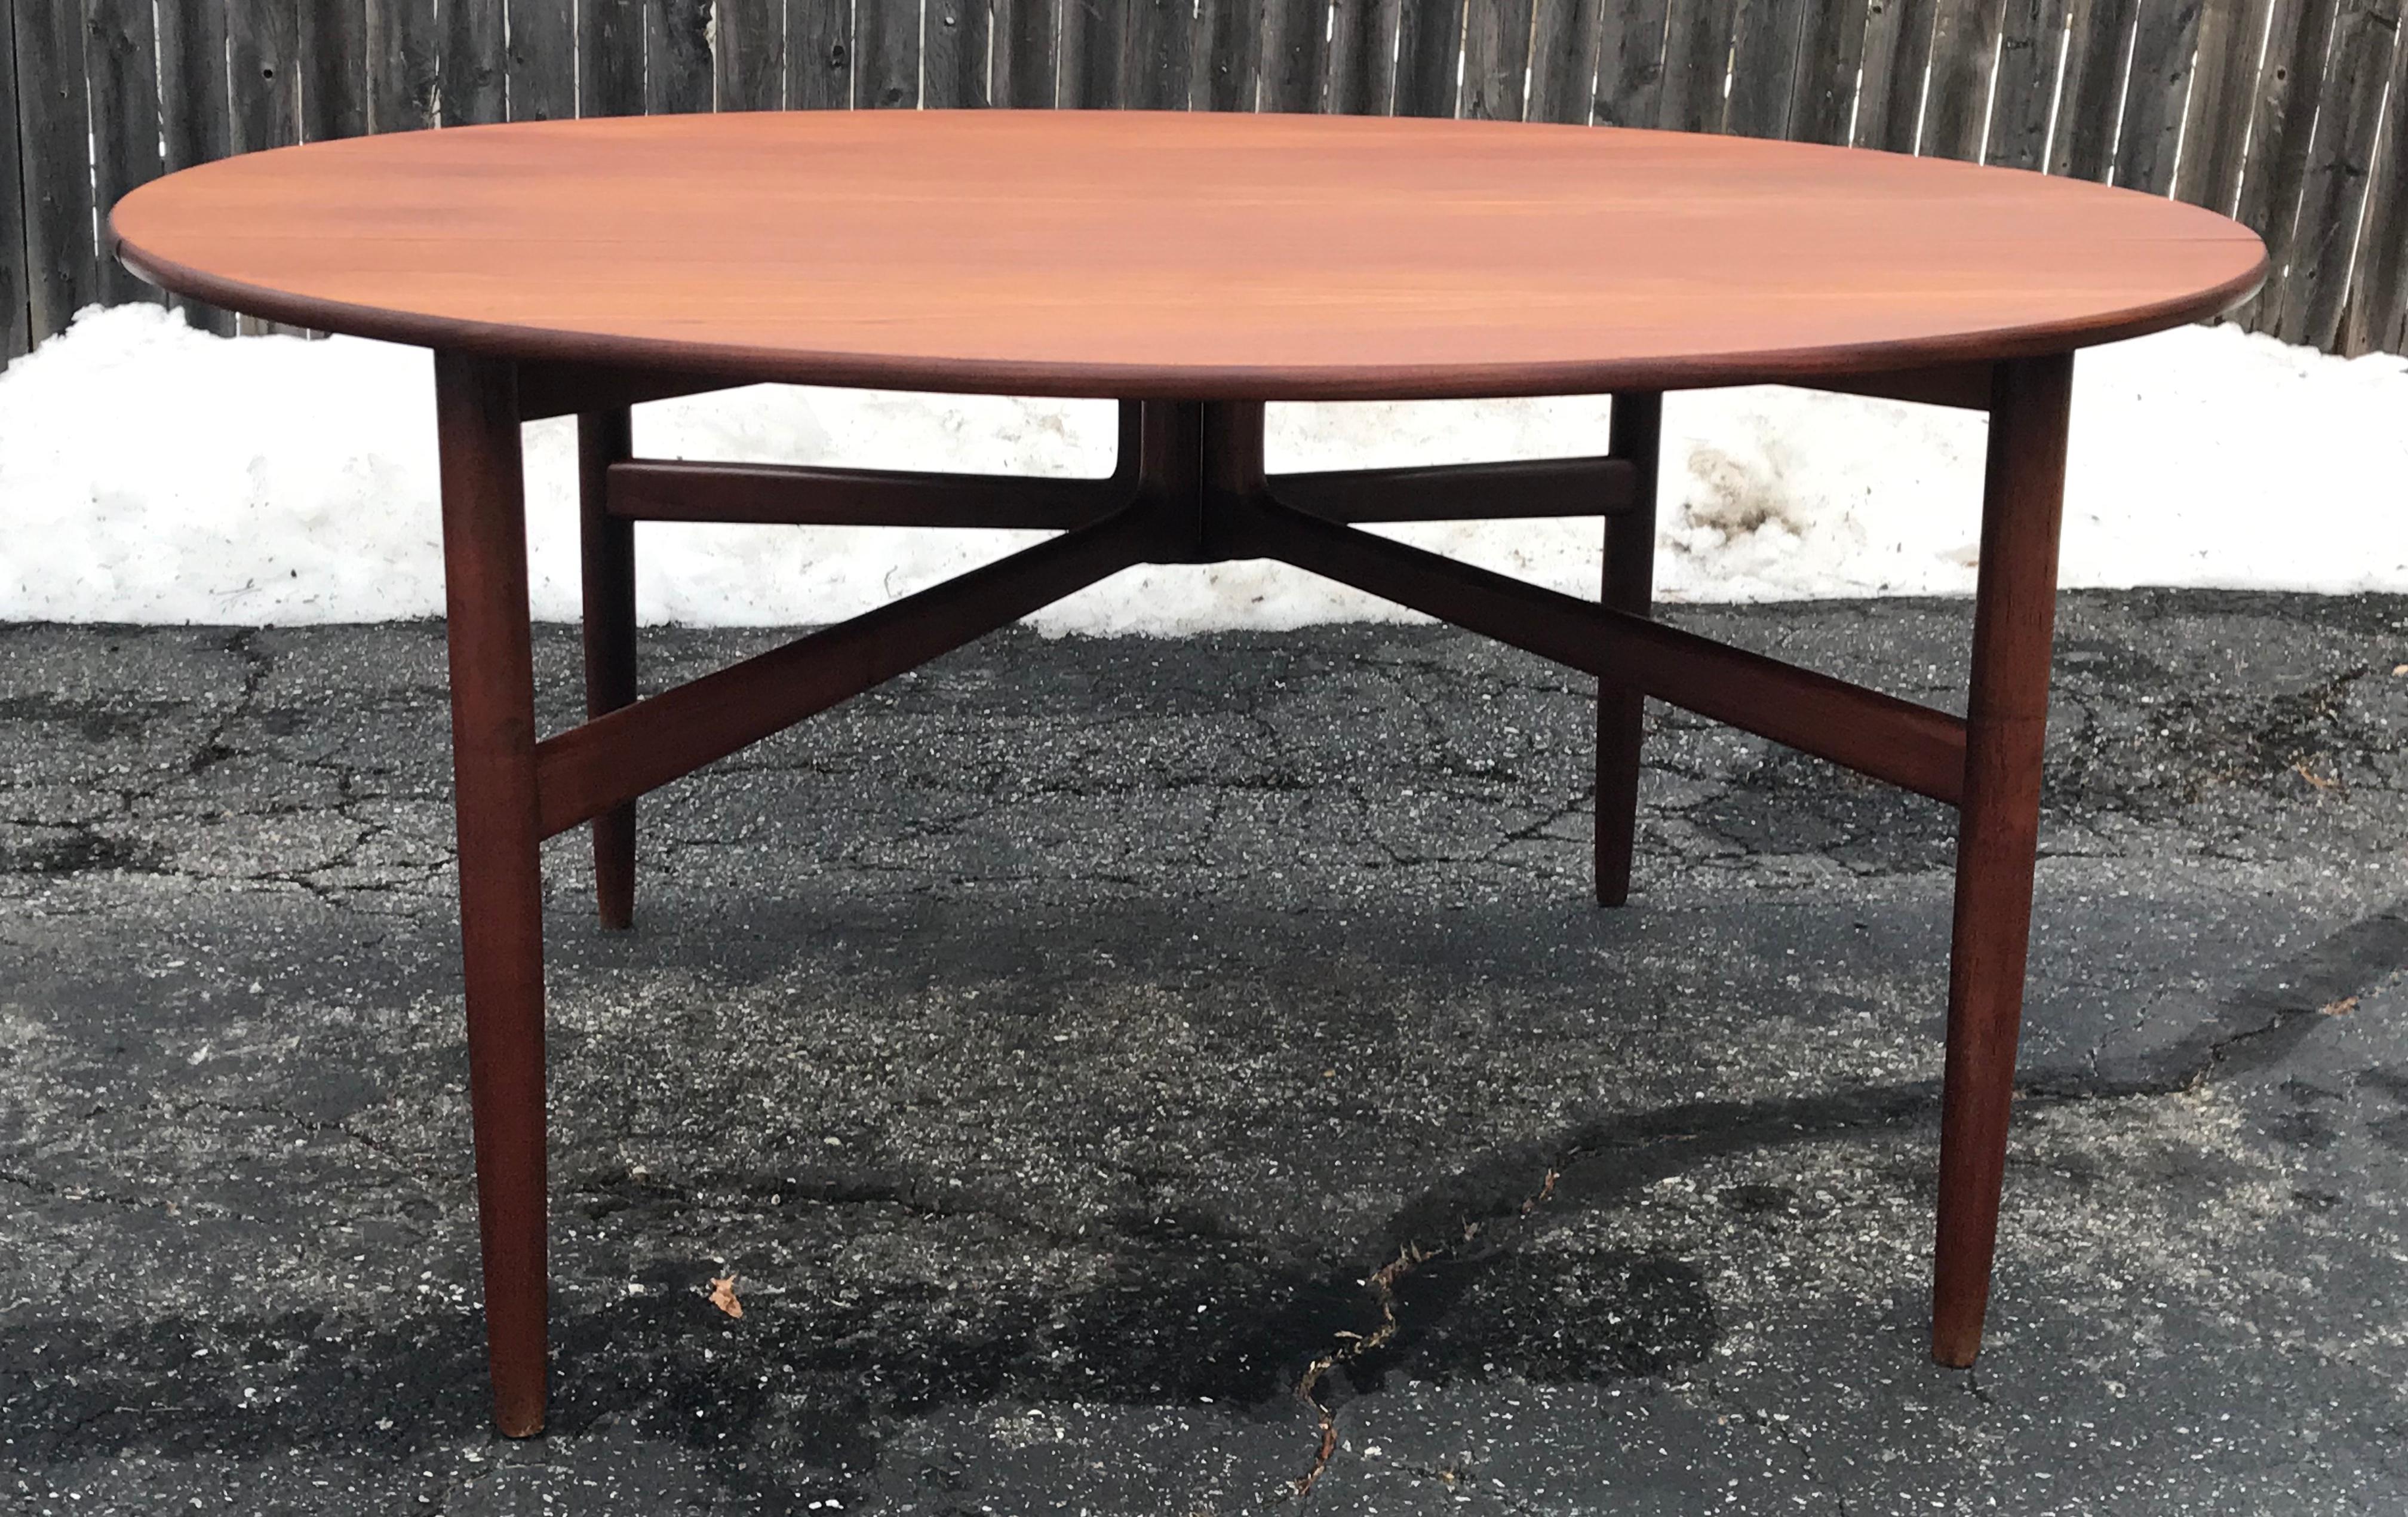 Beautiful solid teak drop-leaf round dining table. Hans Wegner style, well executed base design with piano hinge drop leafs, opens to 60